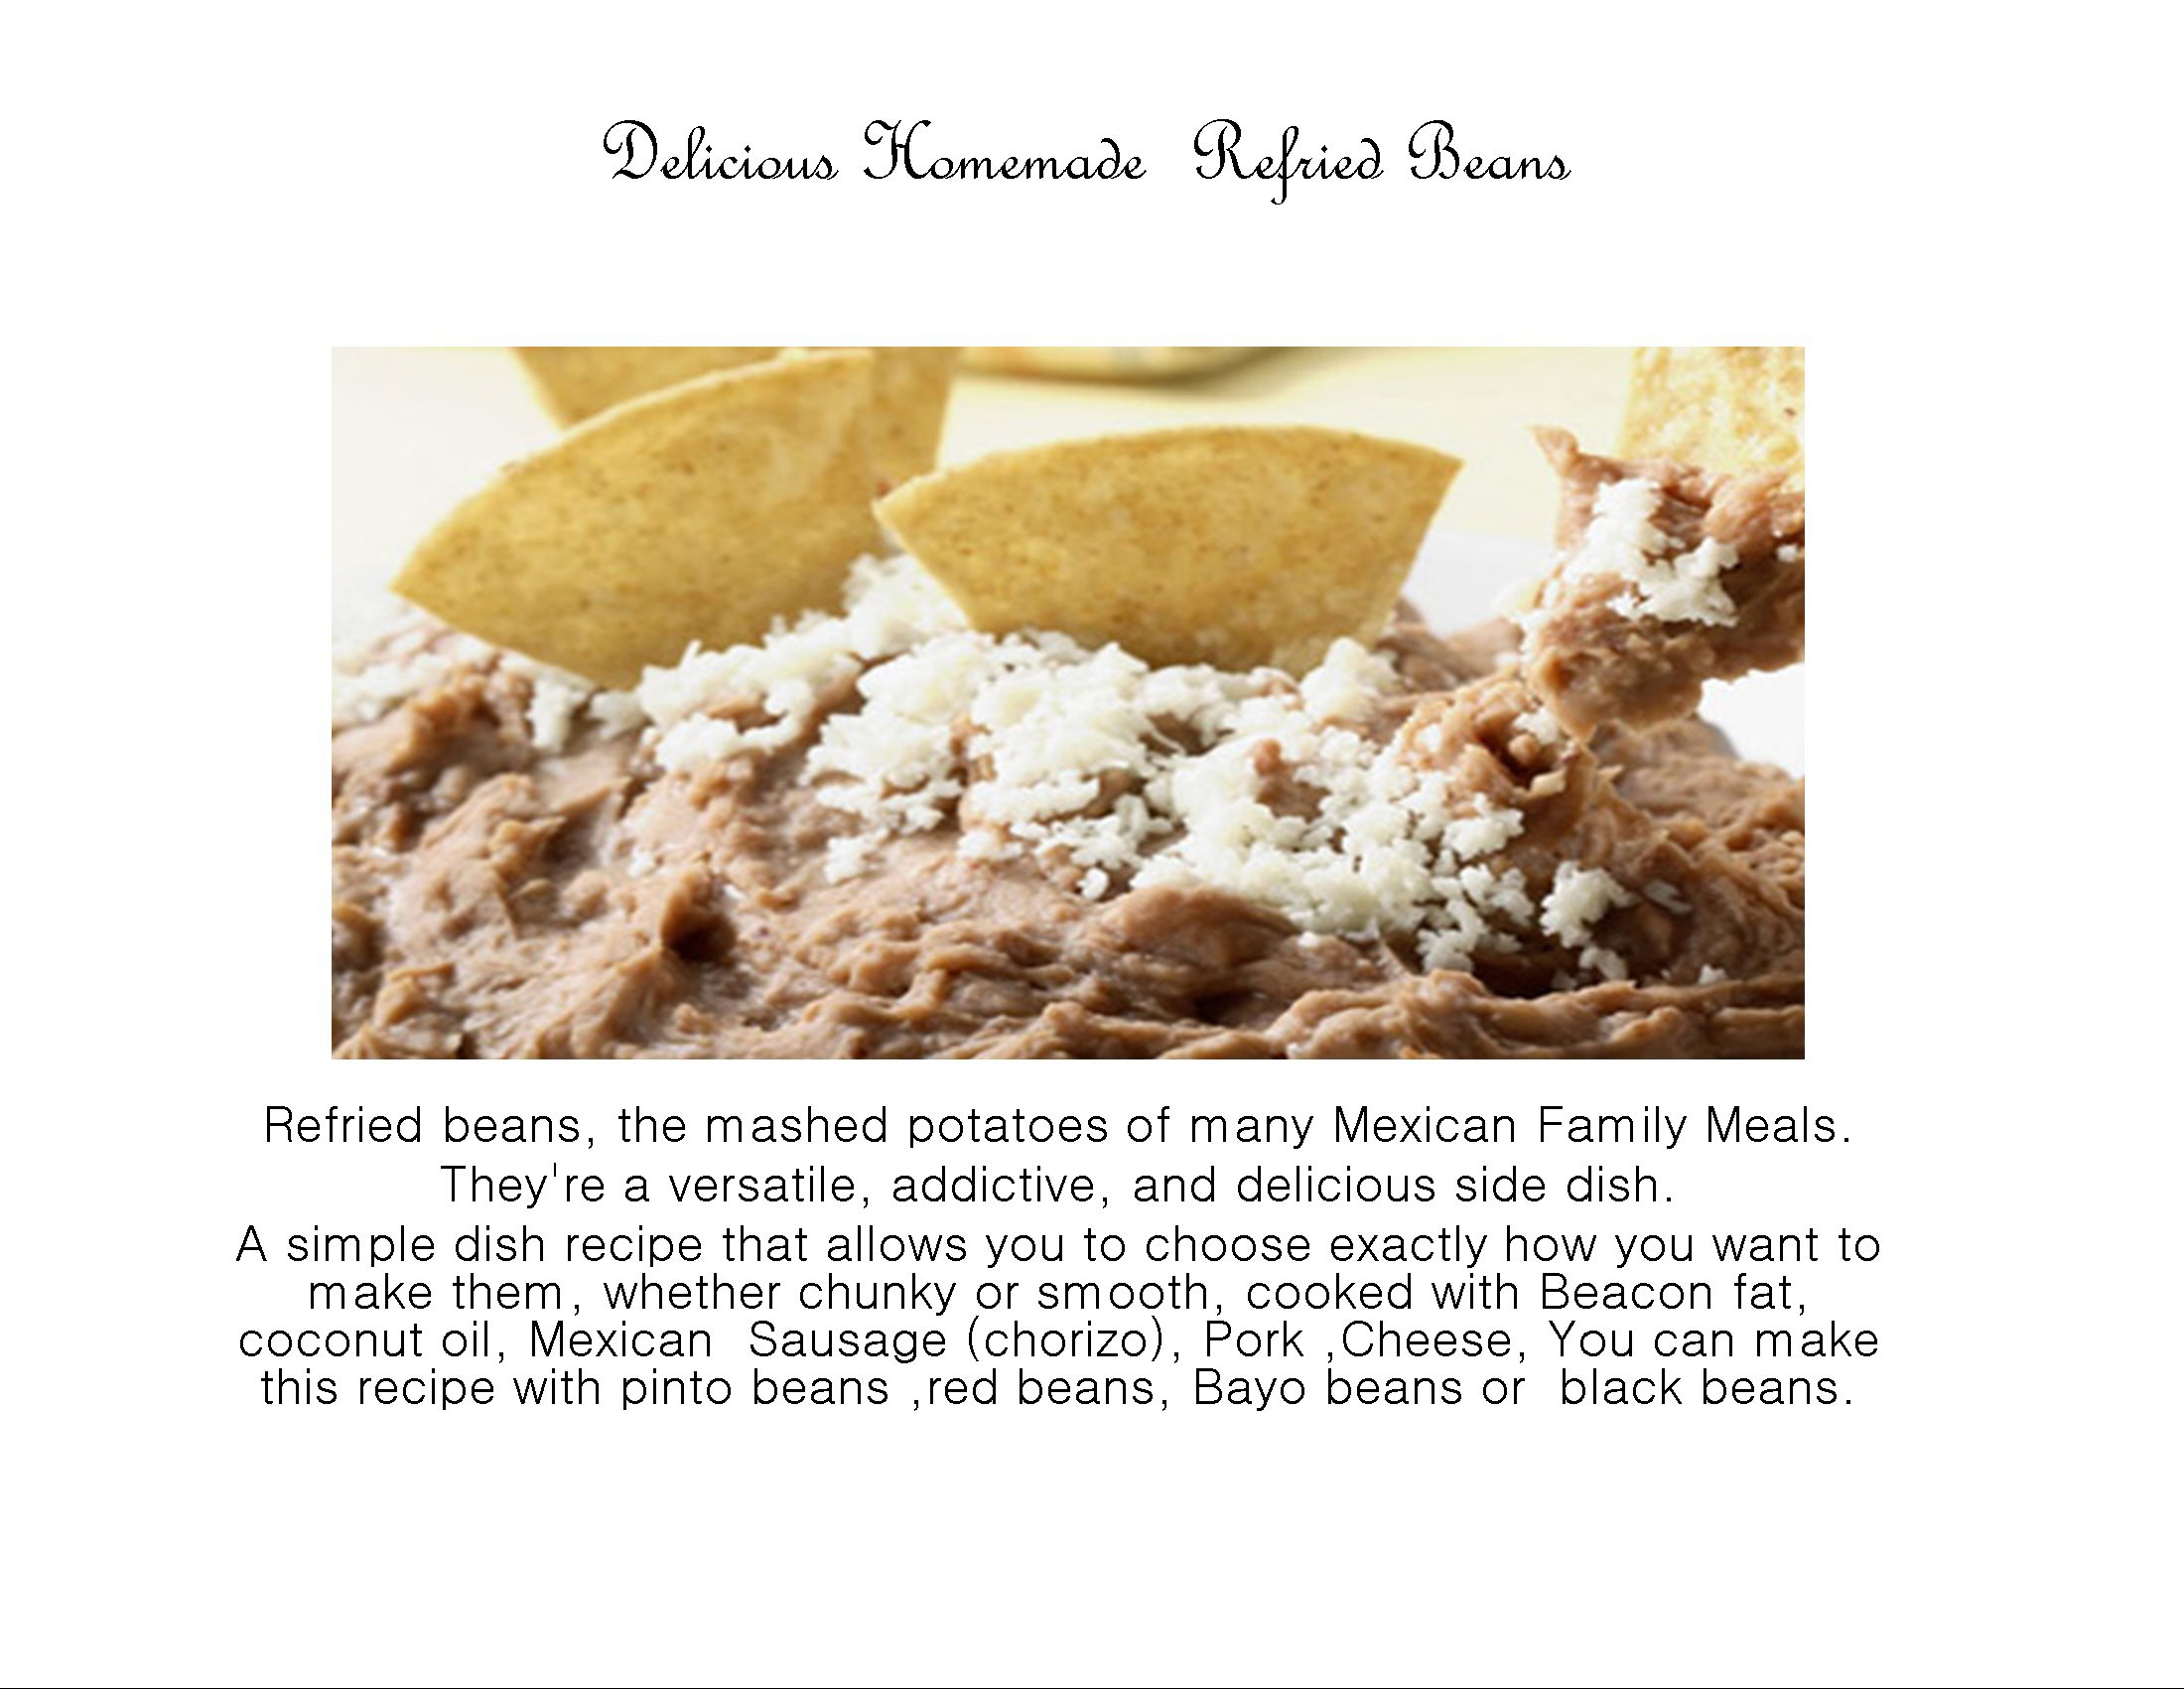 1Delicious Refried Beans.jpg